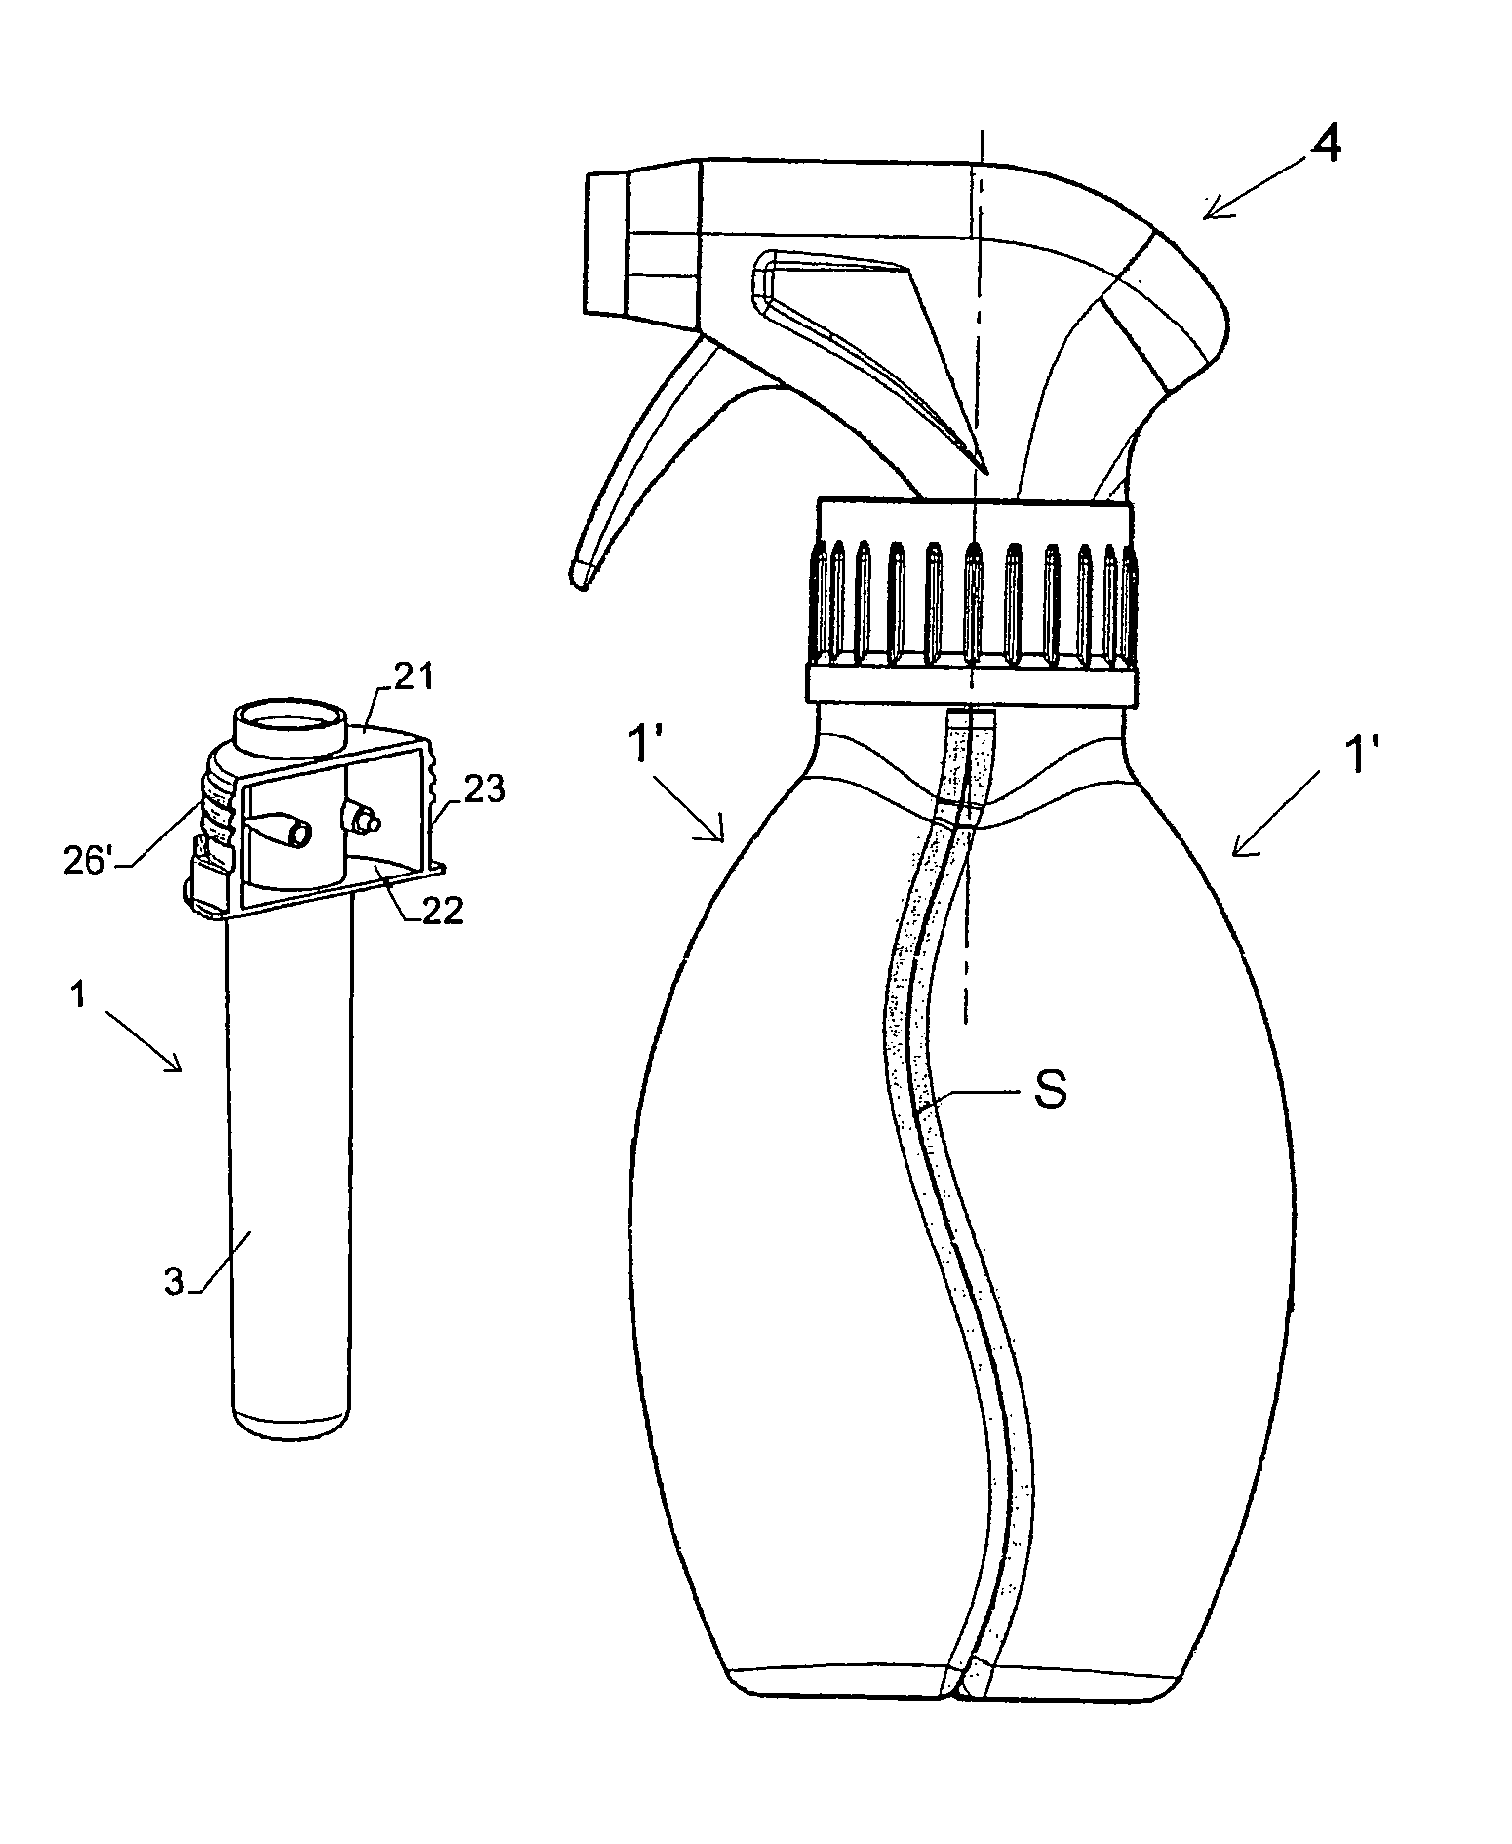 Plastic preform and single container for making a dual-container dispenser